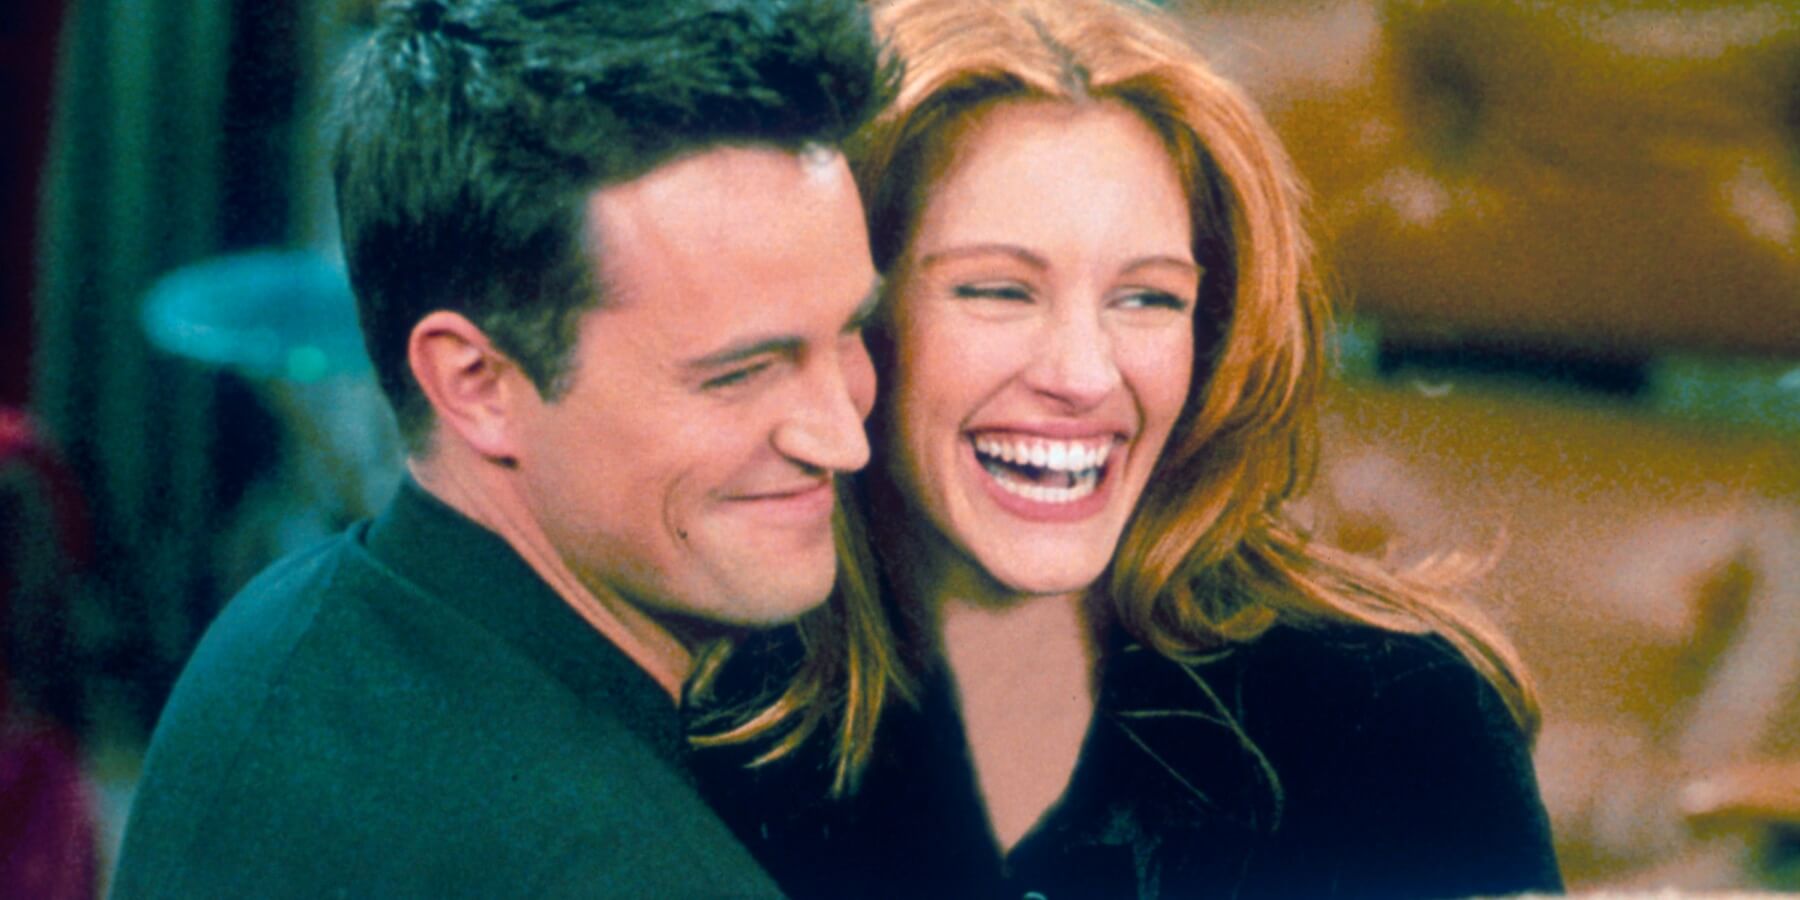 Matthew Perry and Julia Roberts on the set of 'Friends' in the 1996 episode titled "The One After the Superbowl."